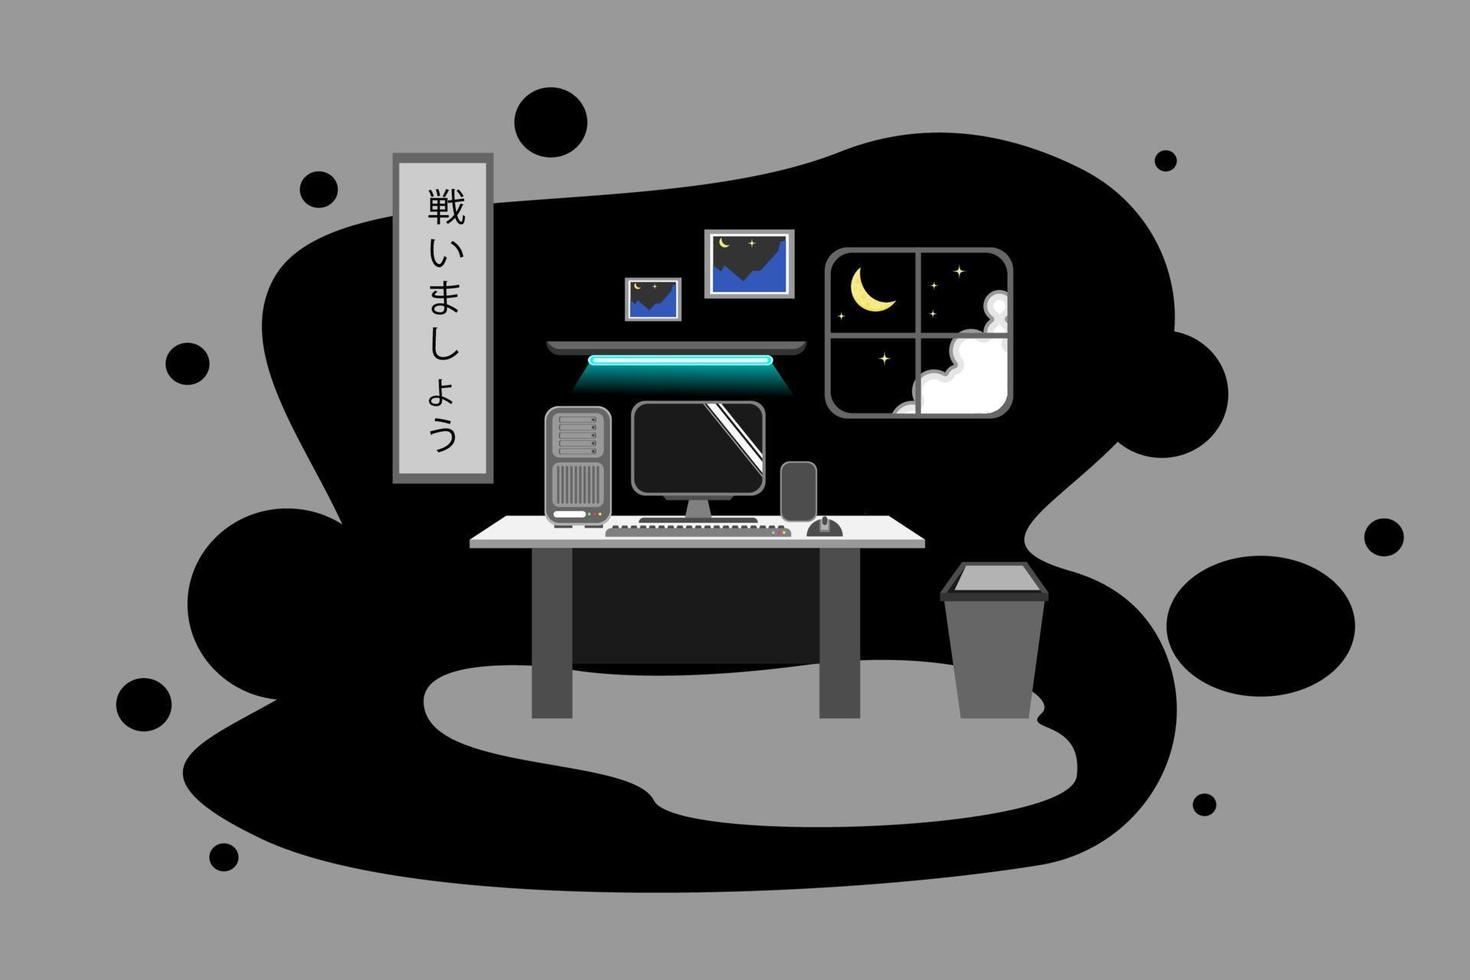 flat illustration of computer desktop setup with monitor, speaker, keyboard, mouse, and cpu in room interior background vector